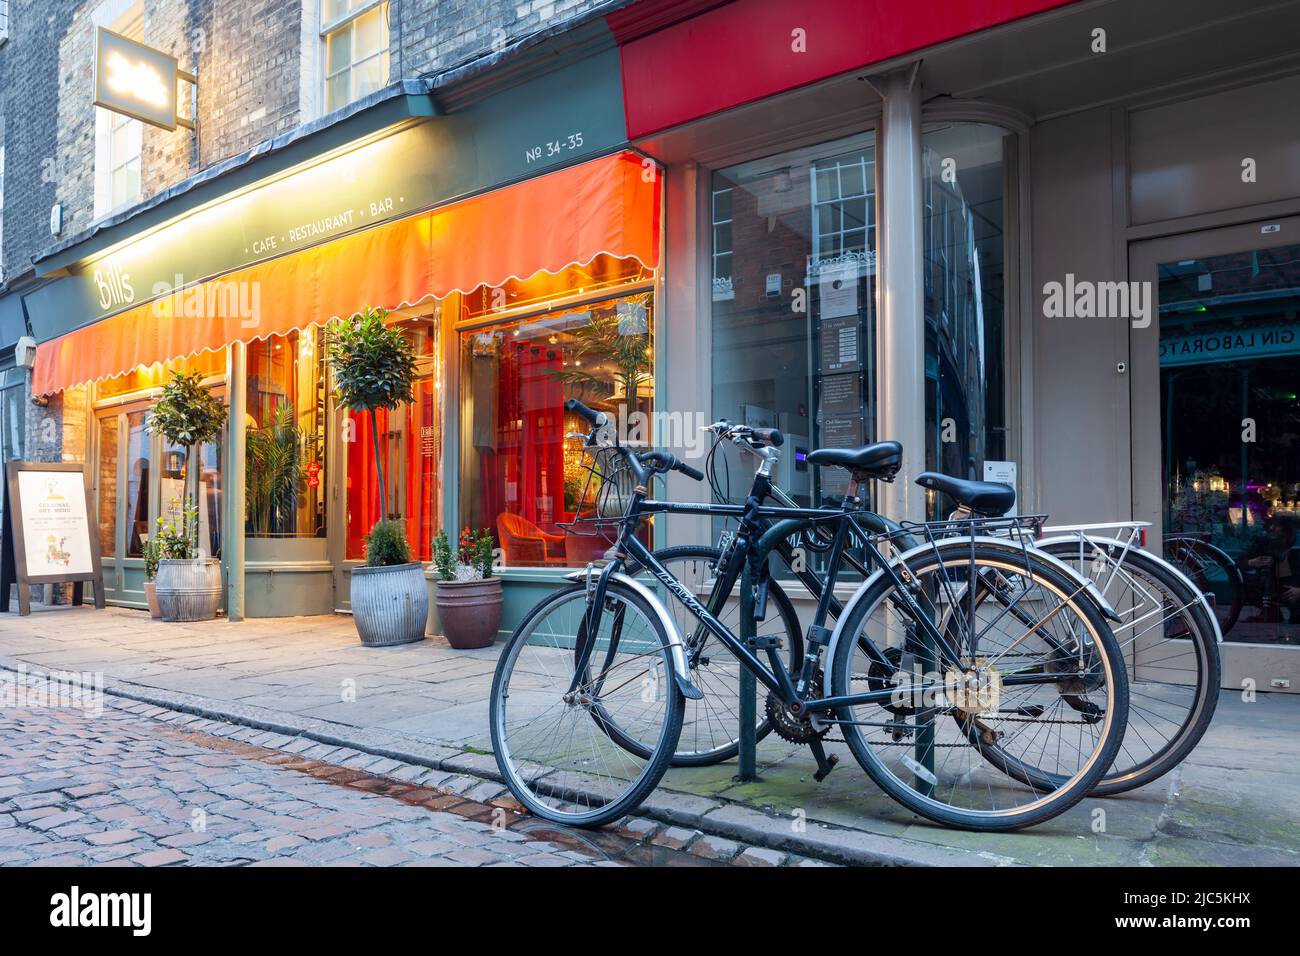 Bicycles parked in Cambridge city centre, England. Stock Photo